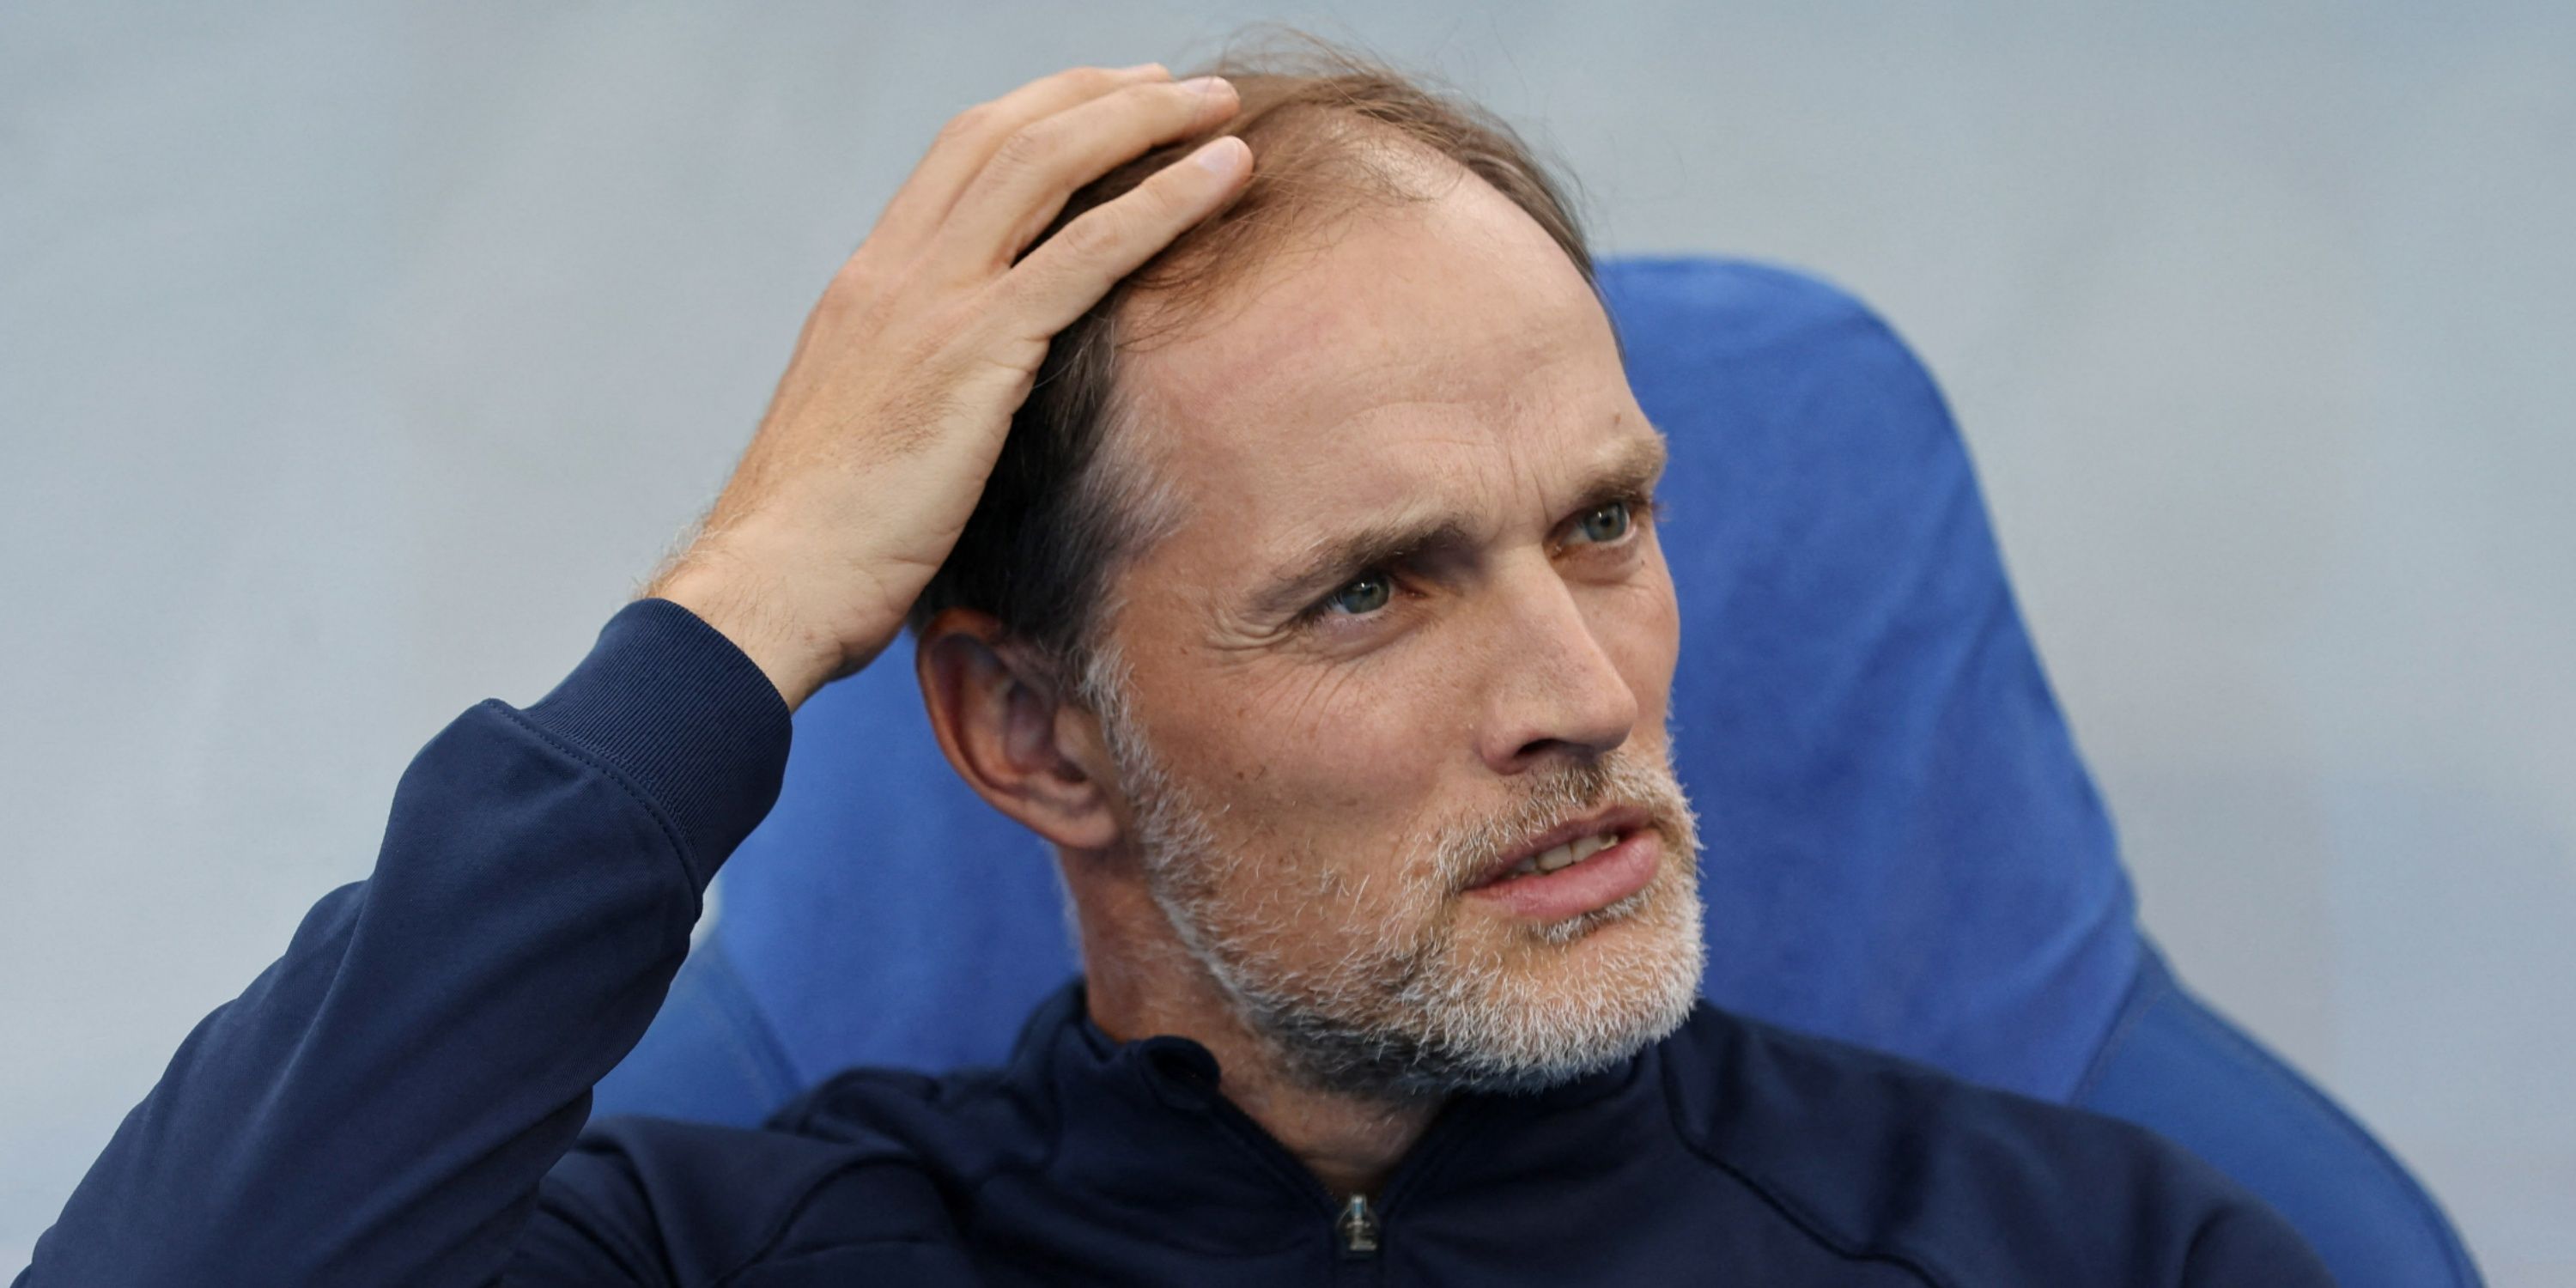 Thomas Tuchel sits in the dugout during his time at Chelsea.